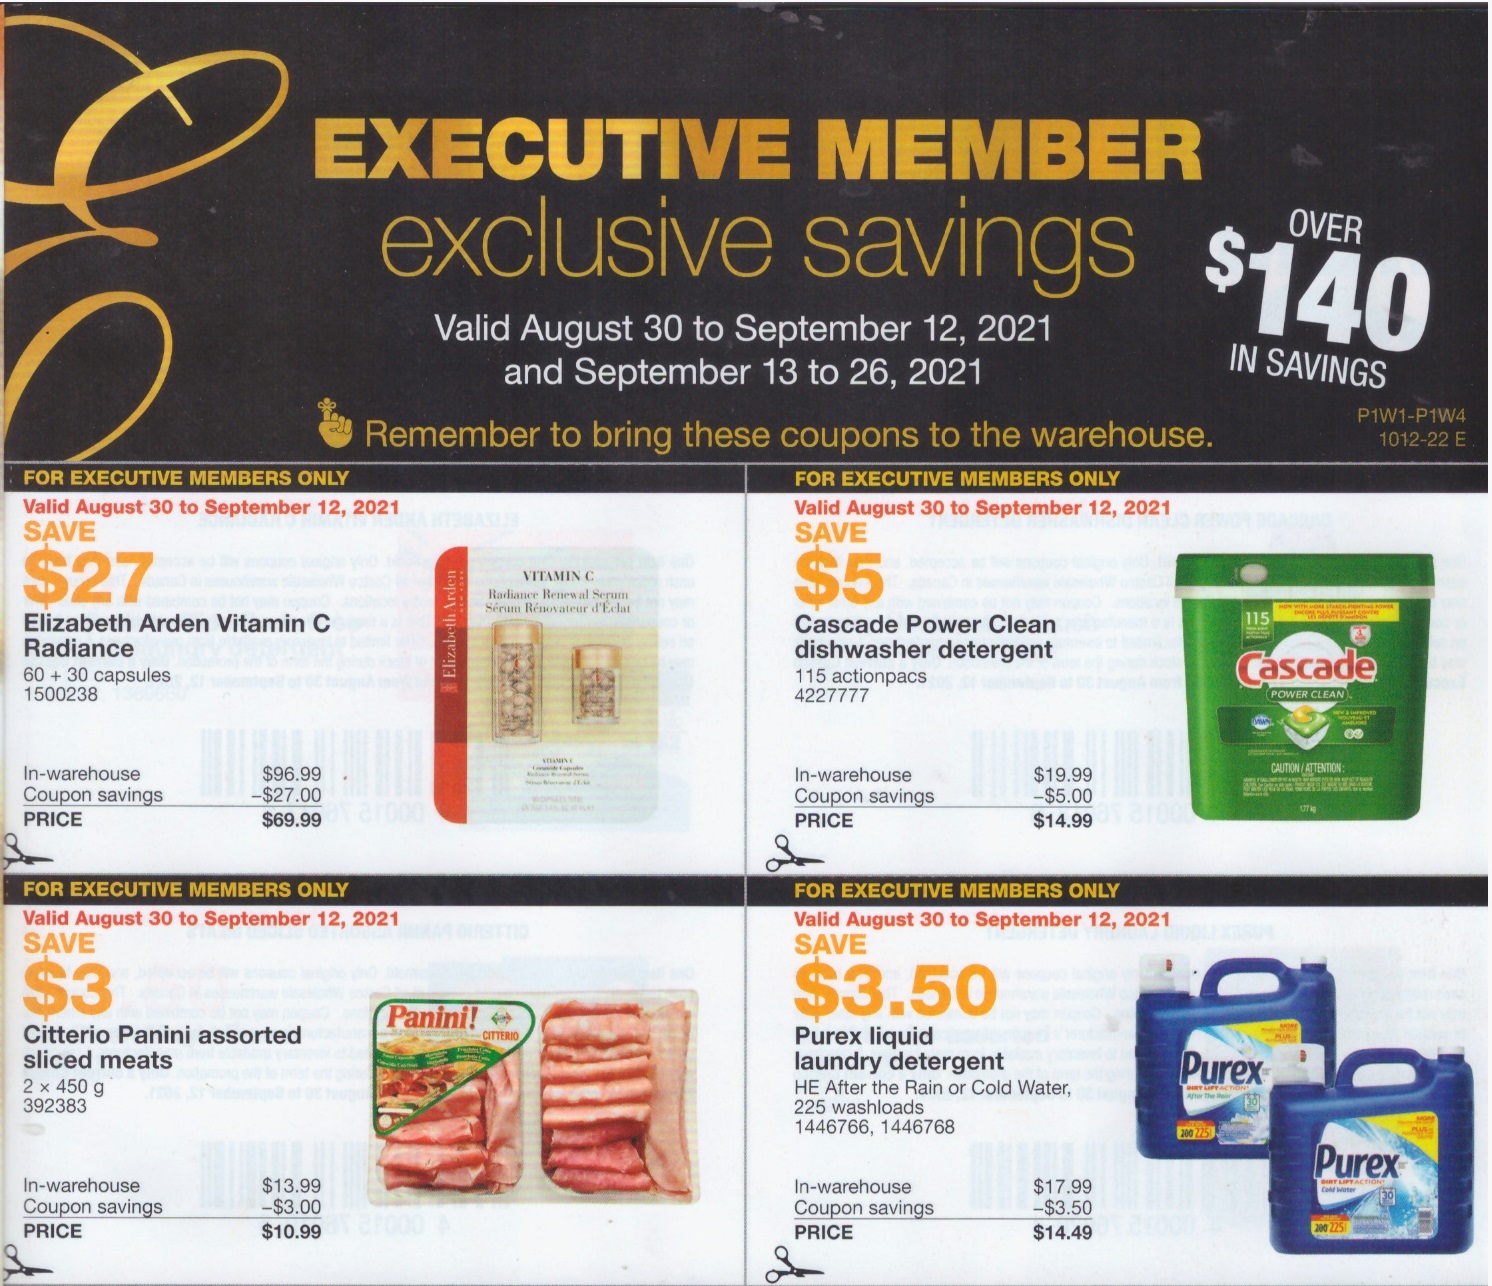 costco-executive-coupons-aug-30-sep-26-2021-costco-west-fan-blog